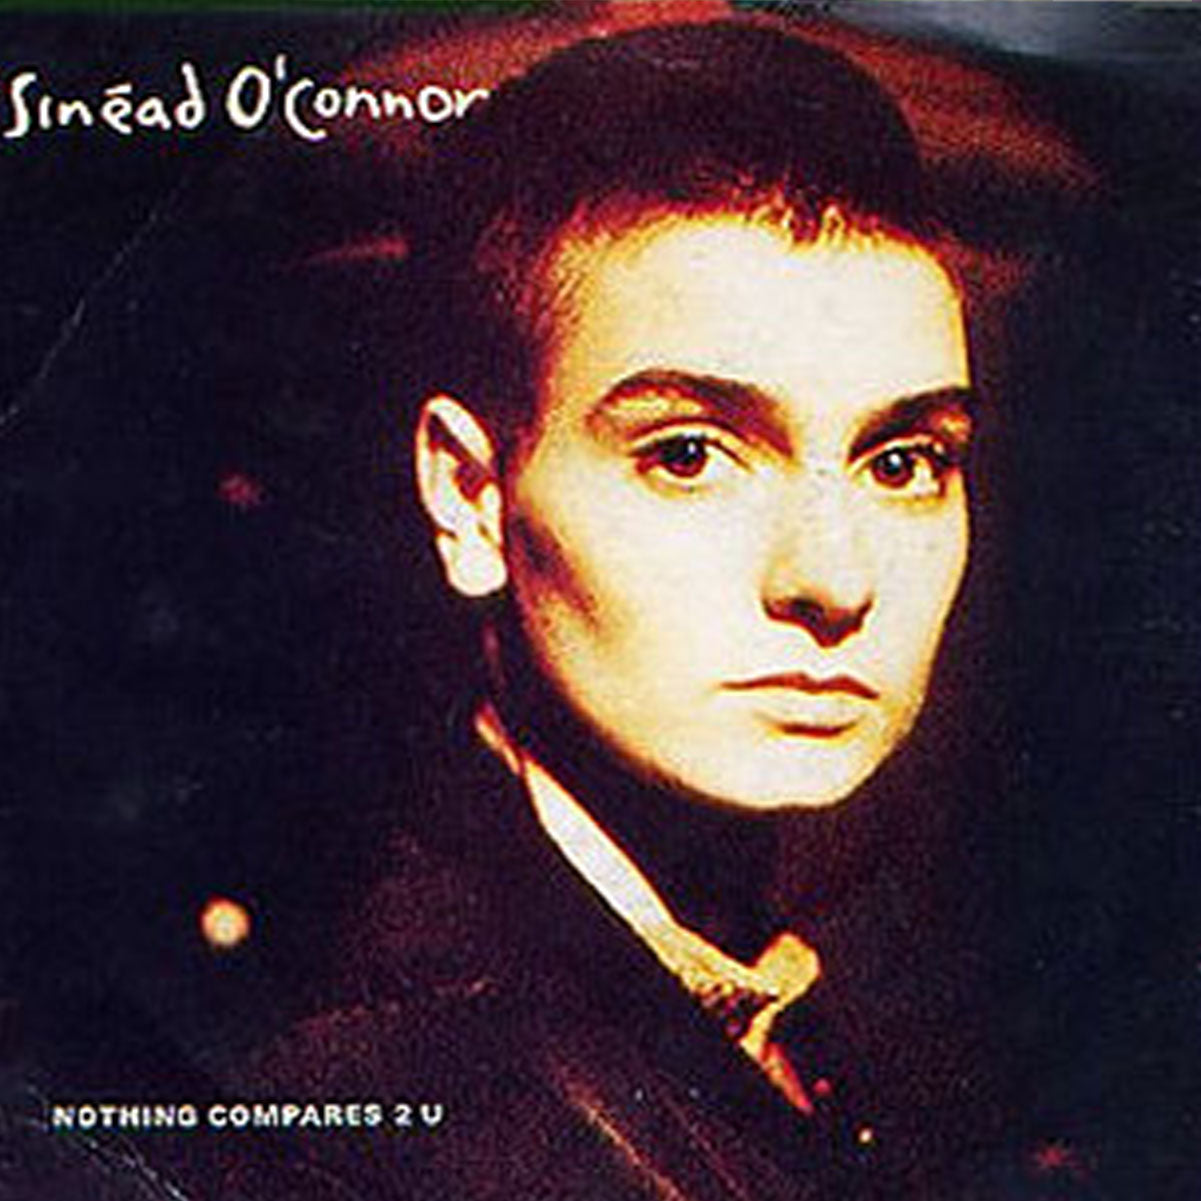 Nothing Compares 2 U - Sinéad O'Connor - Album Cover